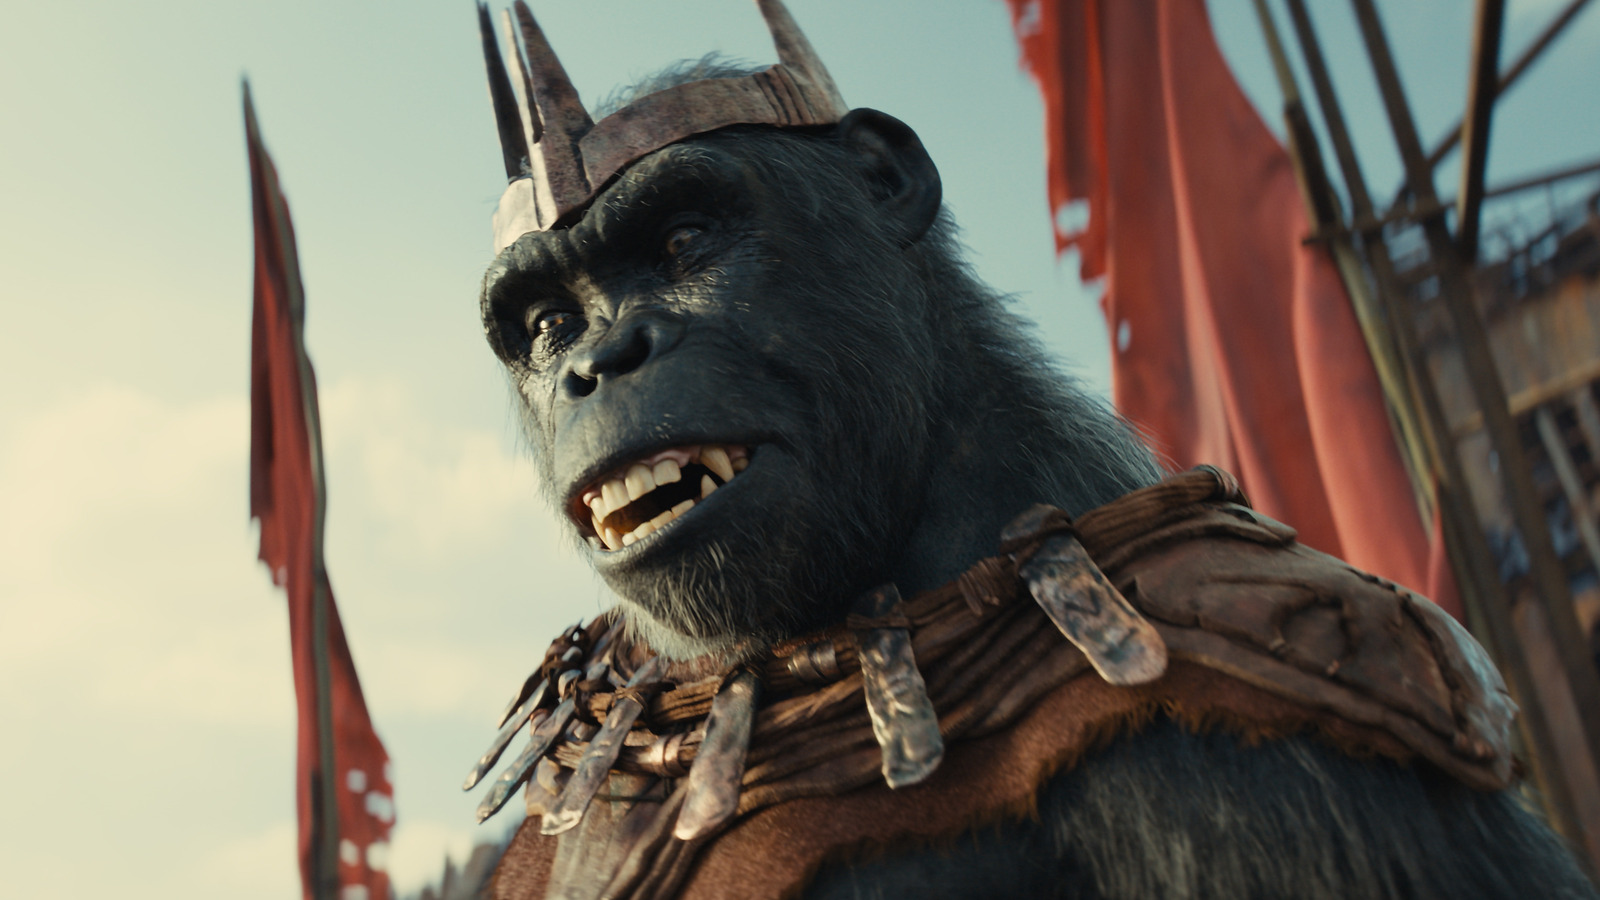 Kingdom Of The Planet Of The Apes Continues A Classic Franchise Tradition